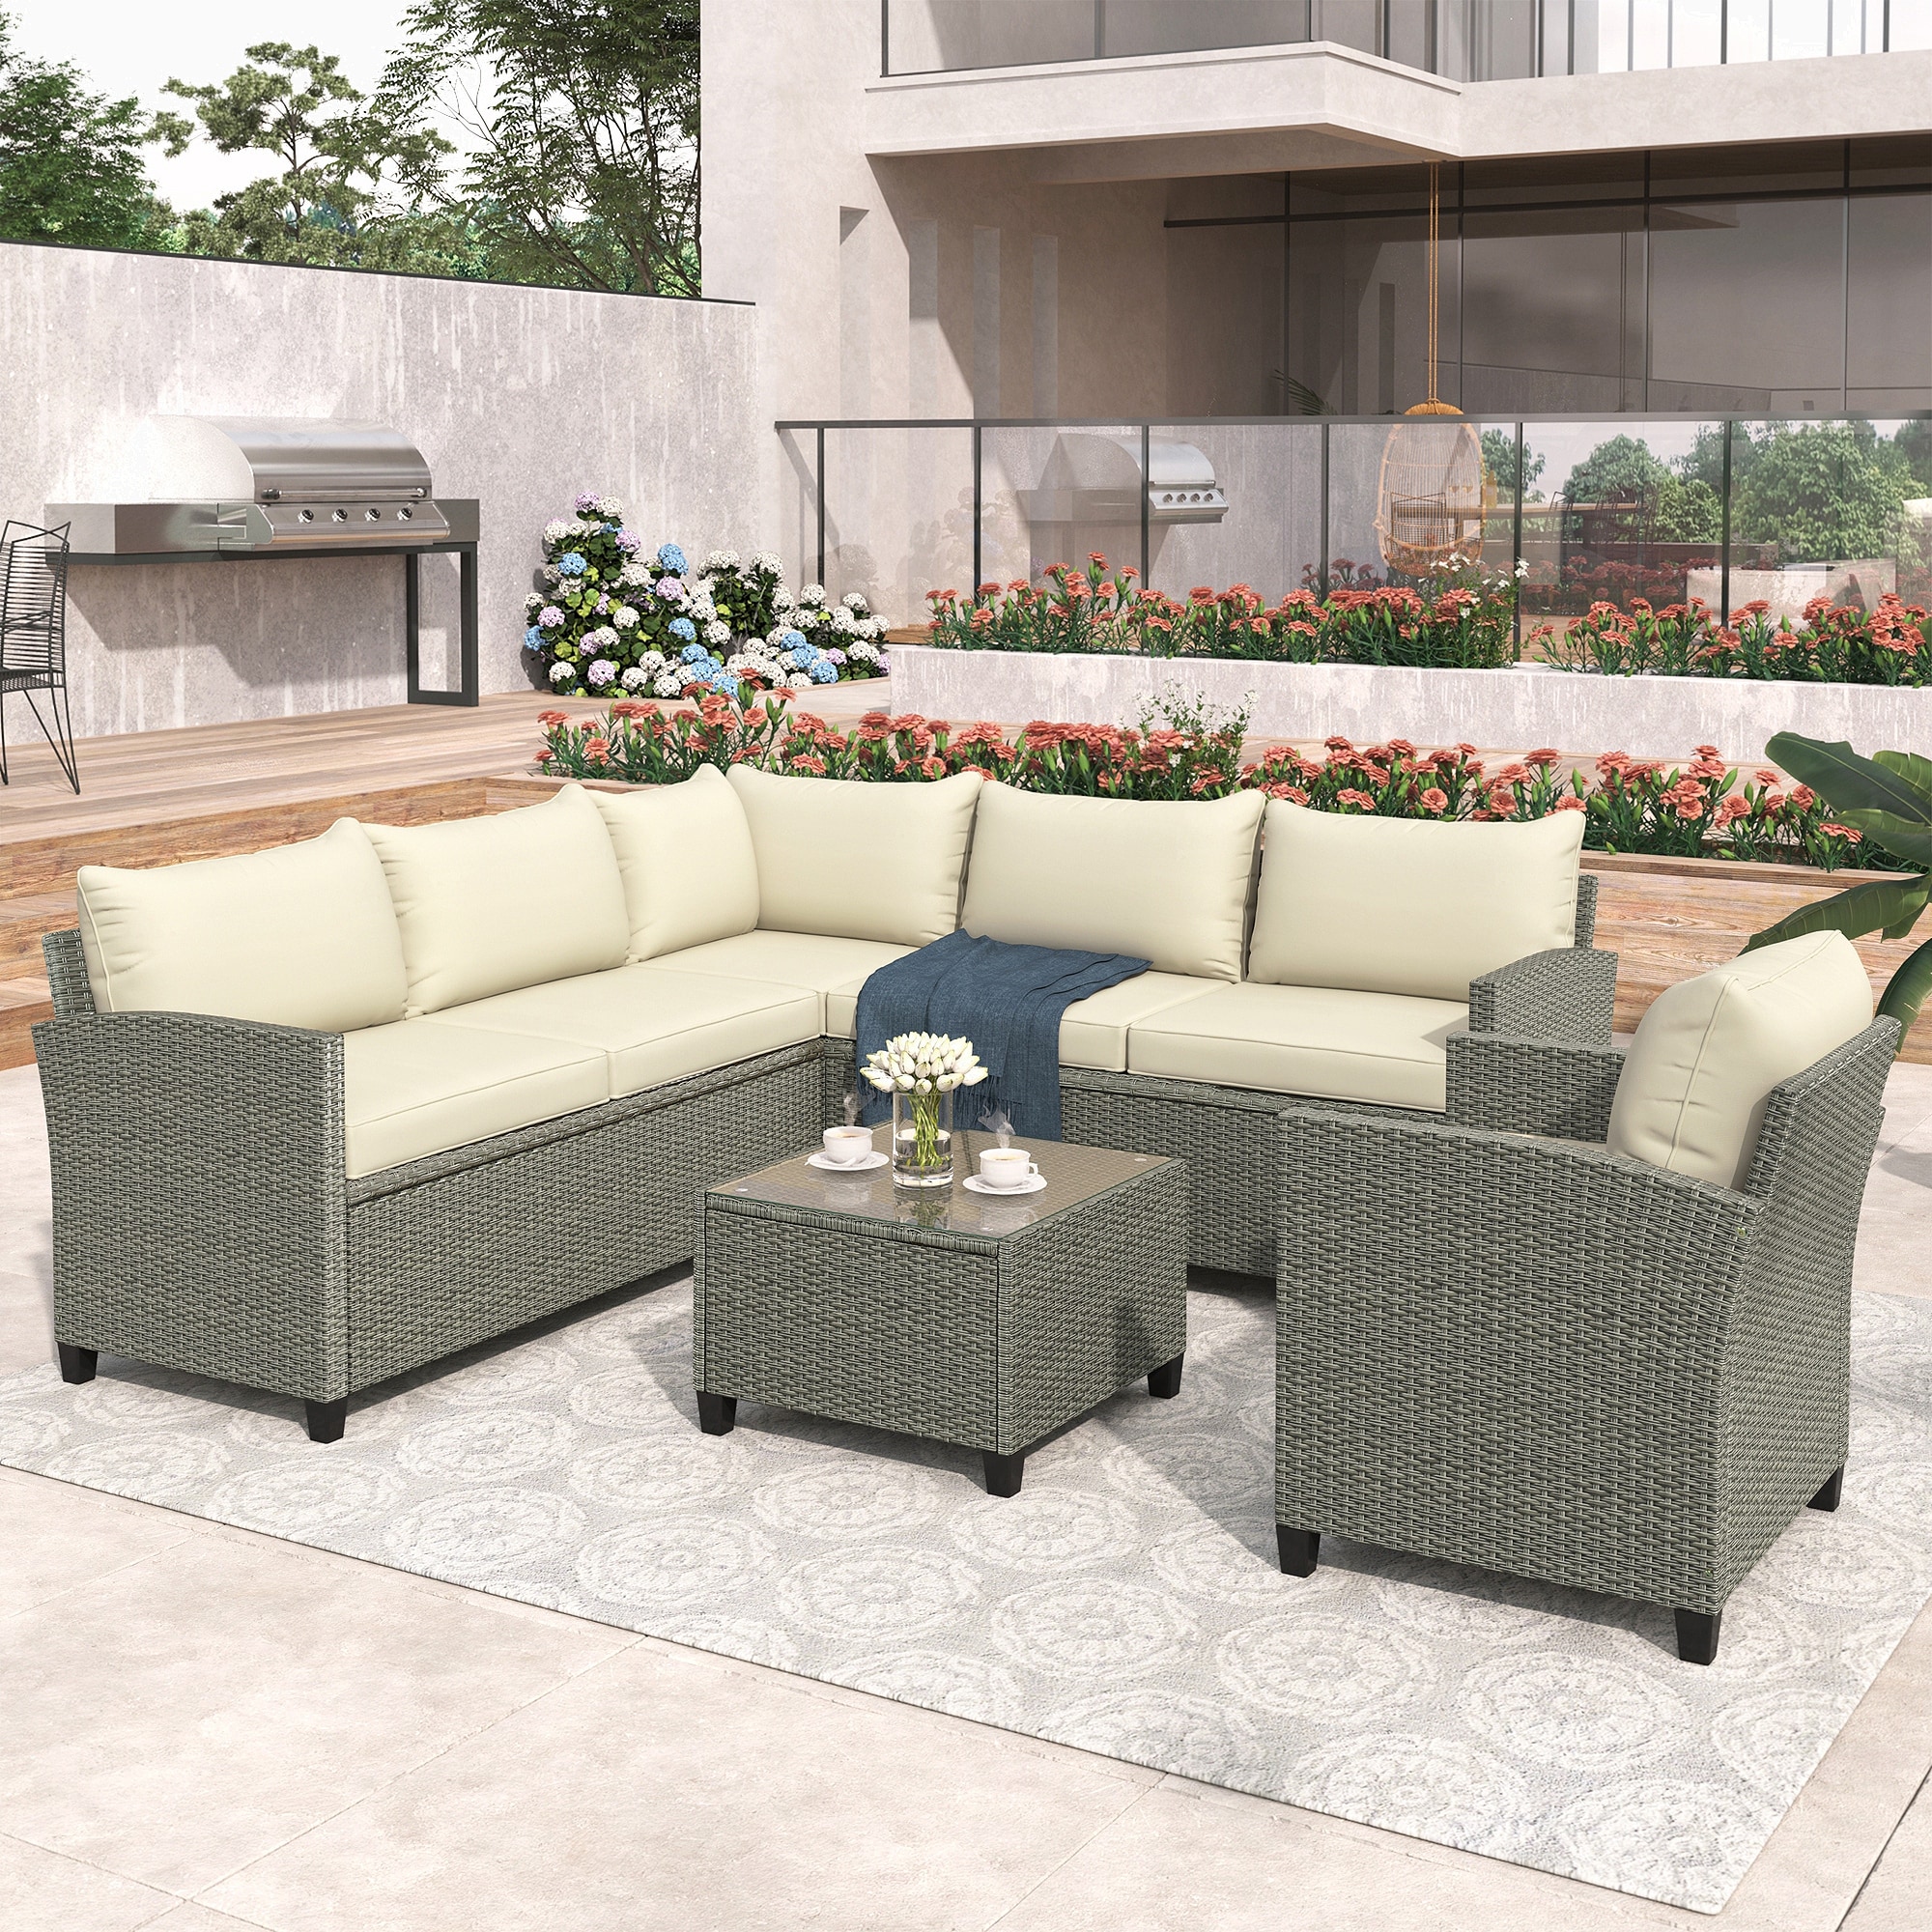 5 Piece Outdoor Conversation Set，with Coffee Table  Cushions And Single Chair